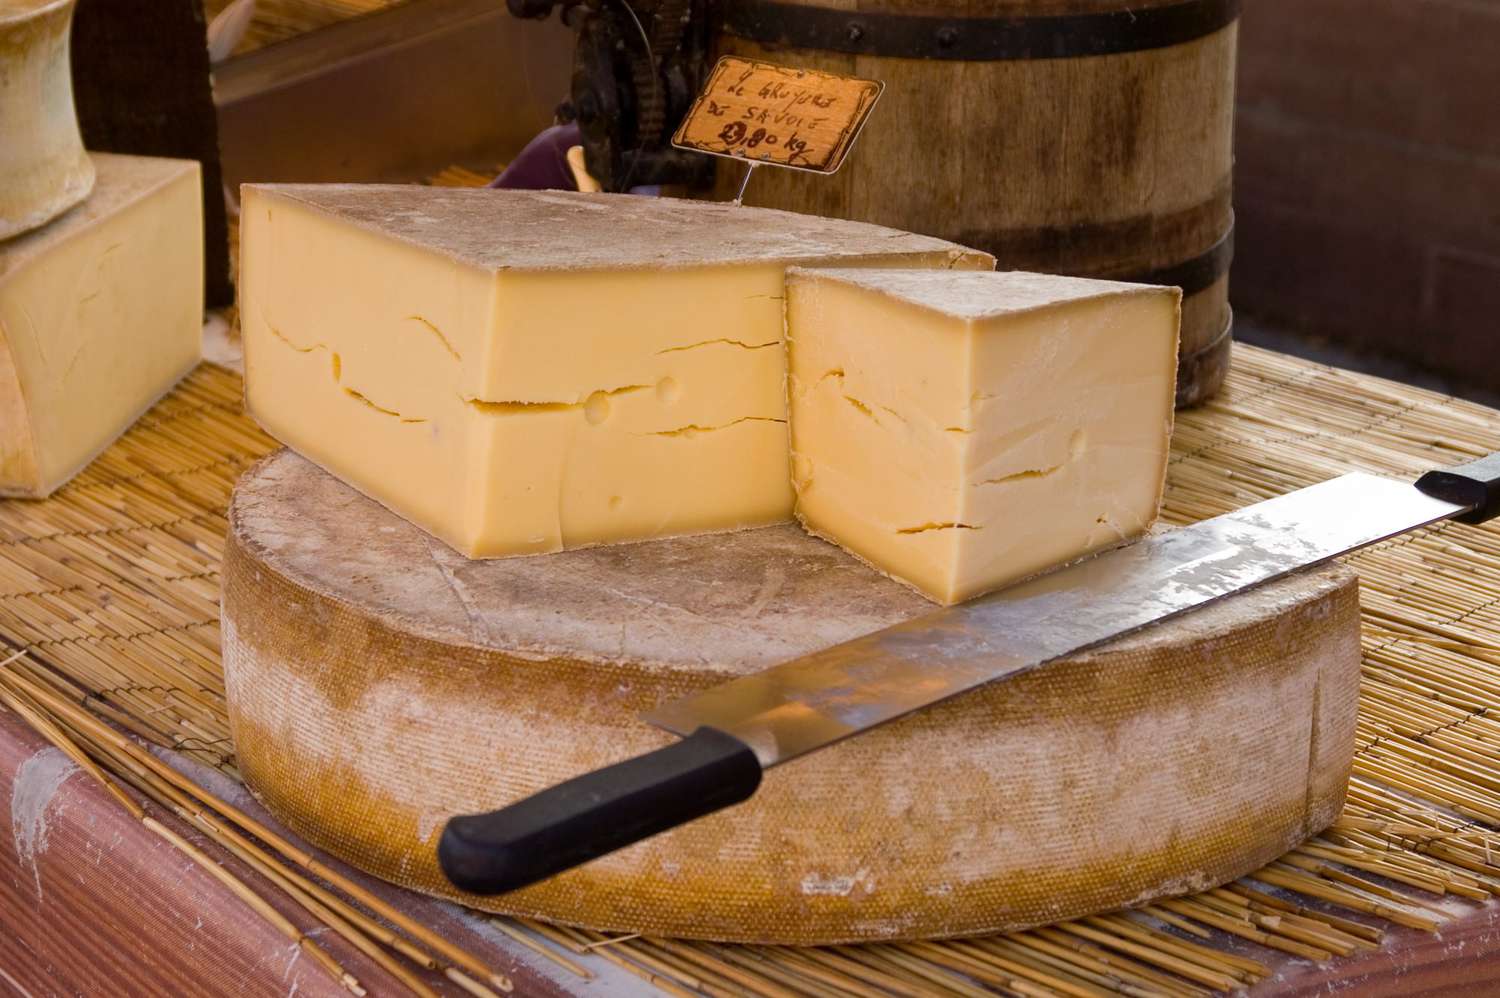 Gruyere at French farmers market